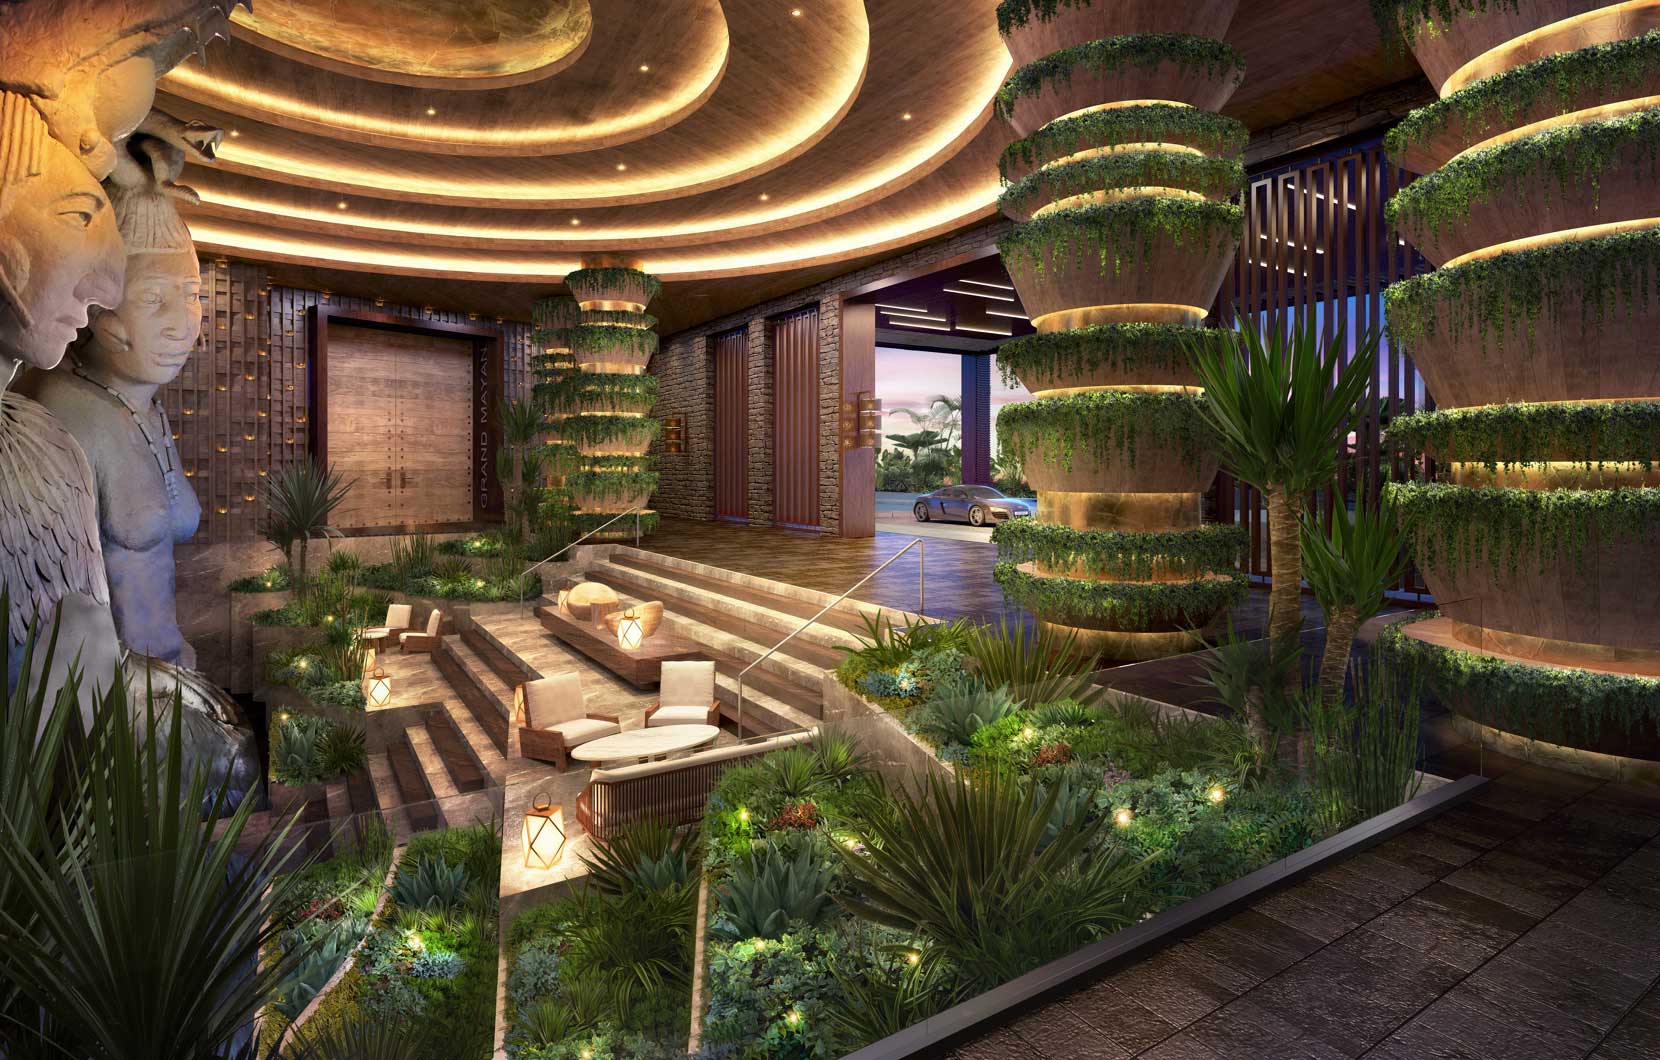 The new features at Los Cabos are just the beginning of this stunning collaboration.